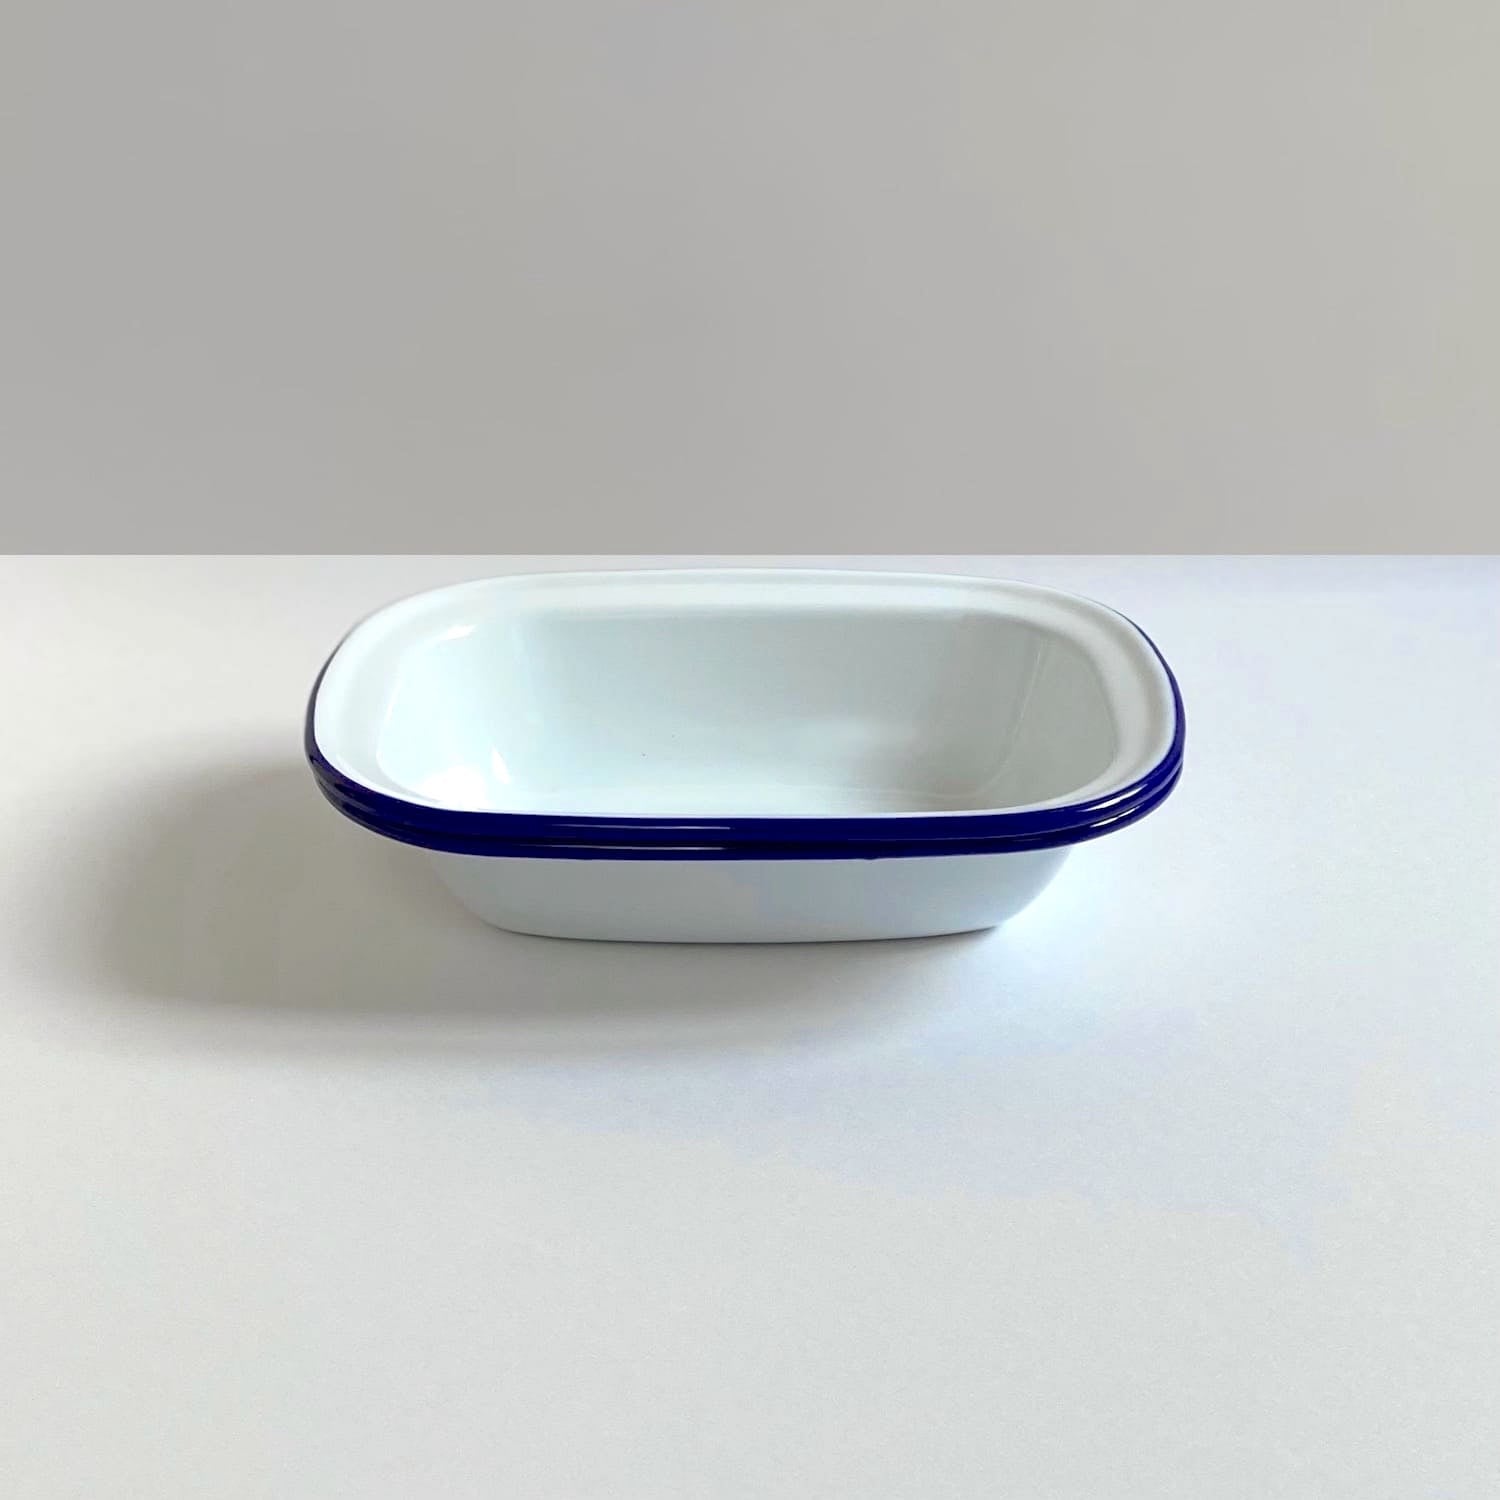 Pair of Blue Rimmed White Enamel Pie Dishes - Small